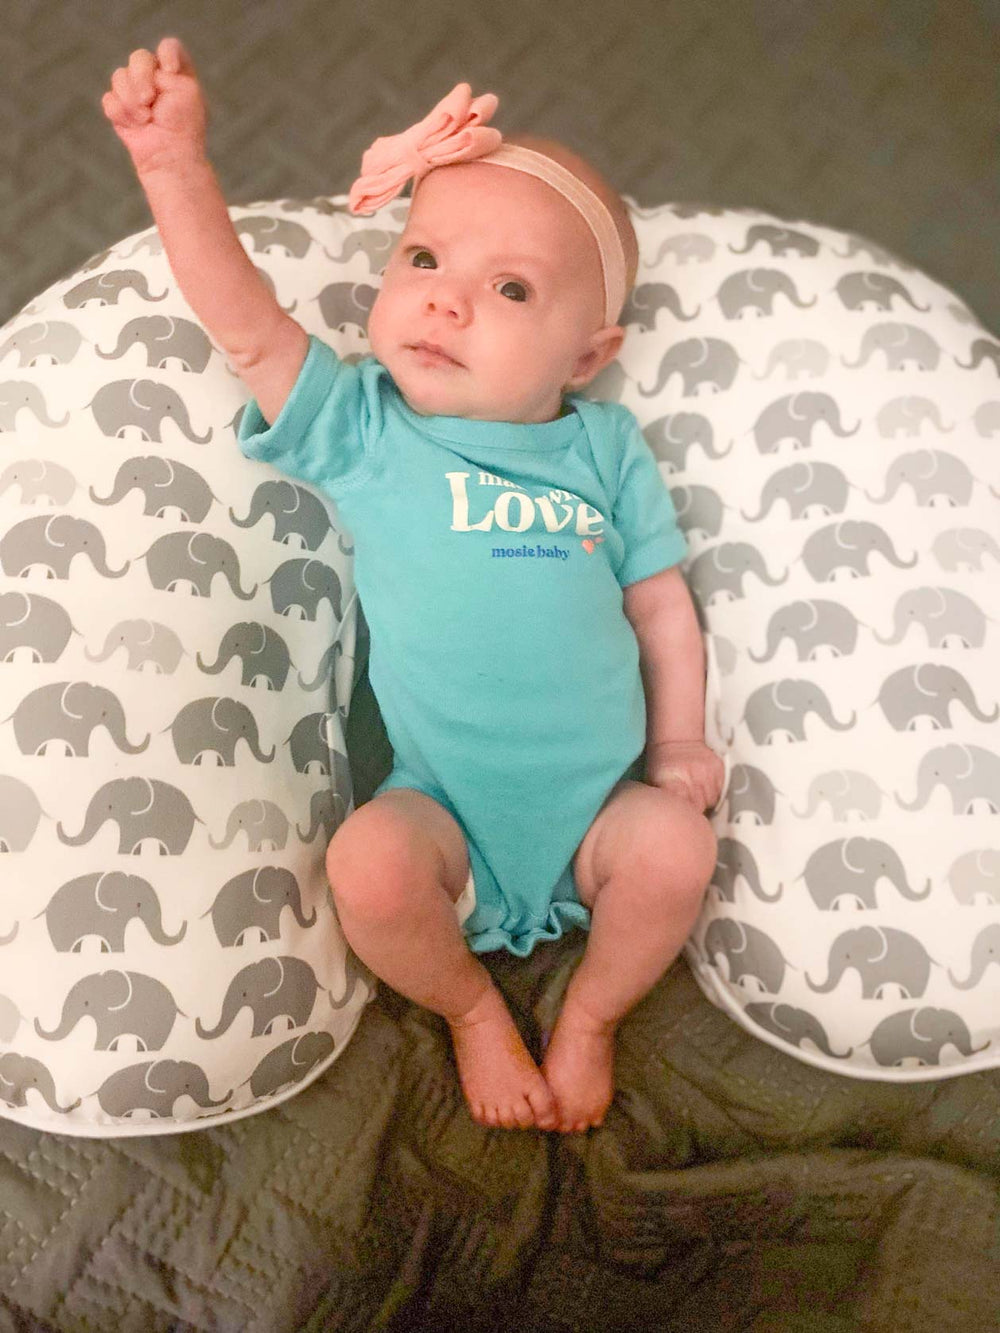 6 week old baby girl in a blue Mosie Baby onesie raises on fist in the air and lays on a baby pillow with gray elephants. She has a pink bow and headband on her head.